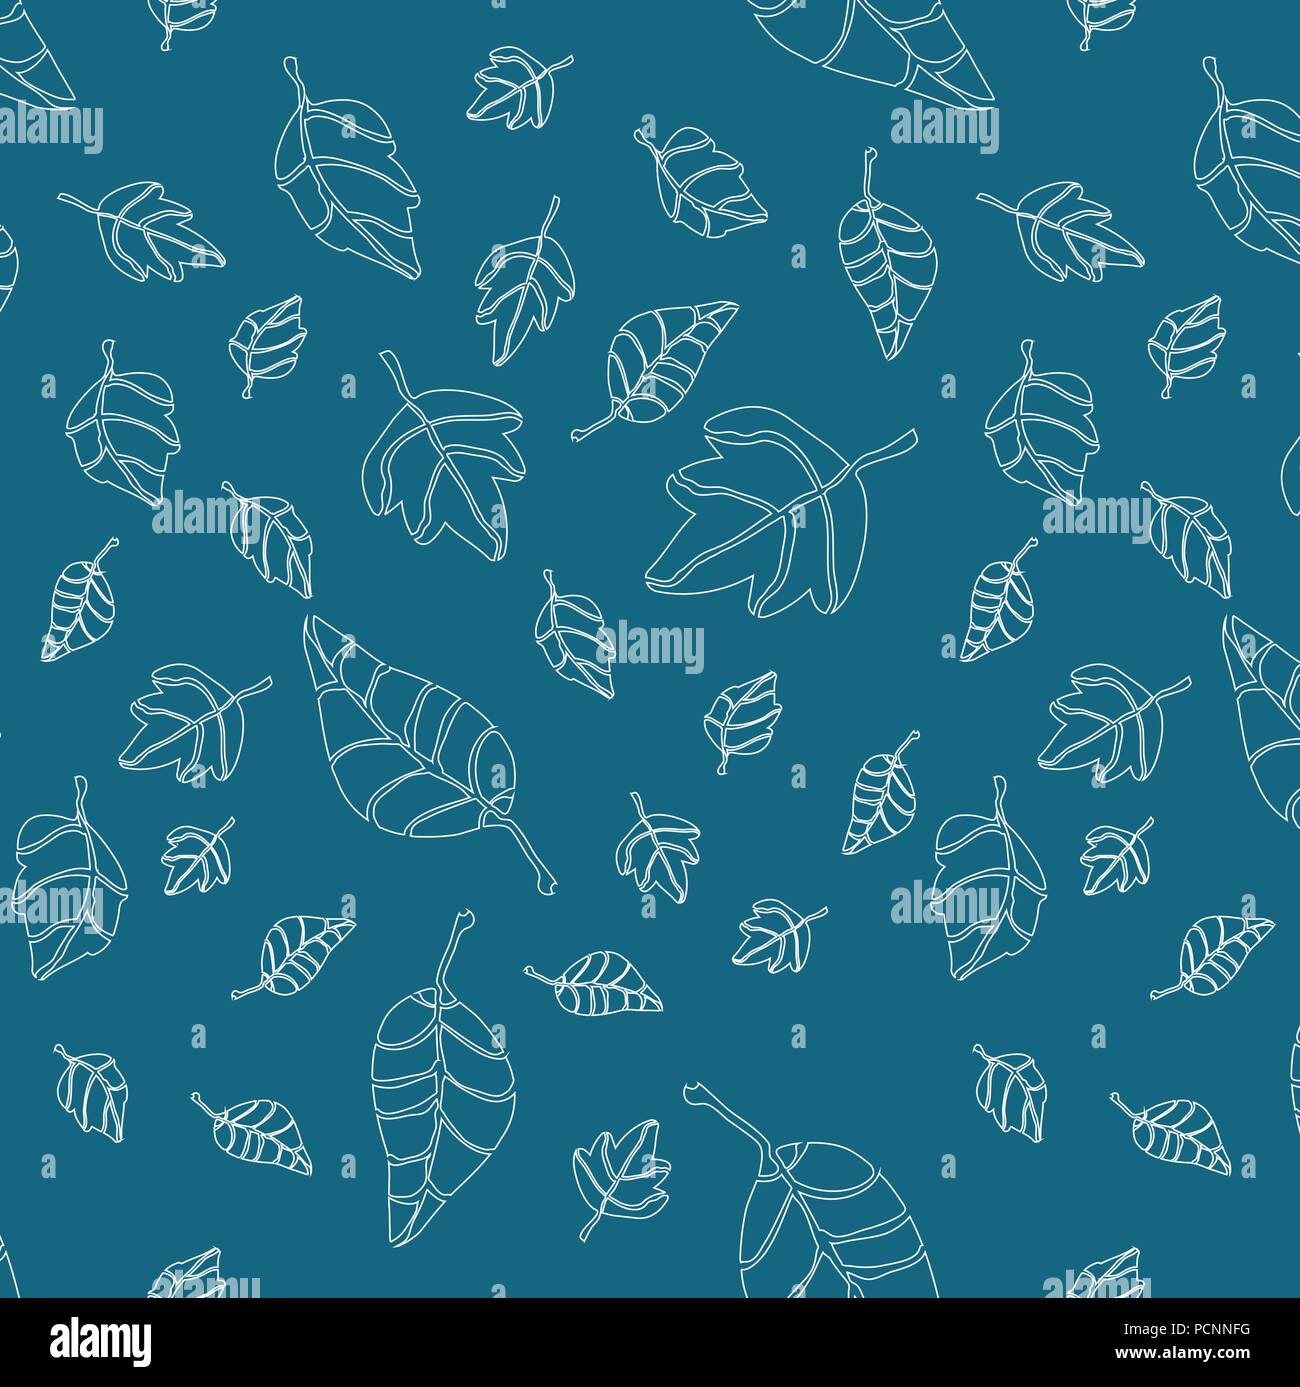 Vector surface pattern, texture with shapes of falling leaves, foliage in white color on dark blue, dark turquoise, teal background Stock Vector